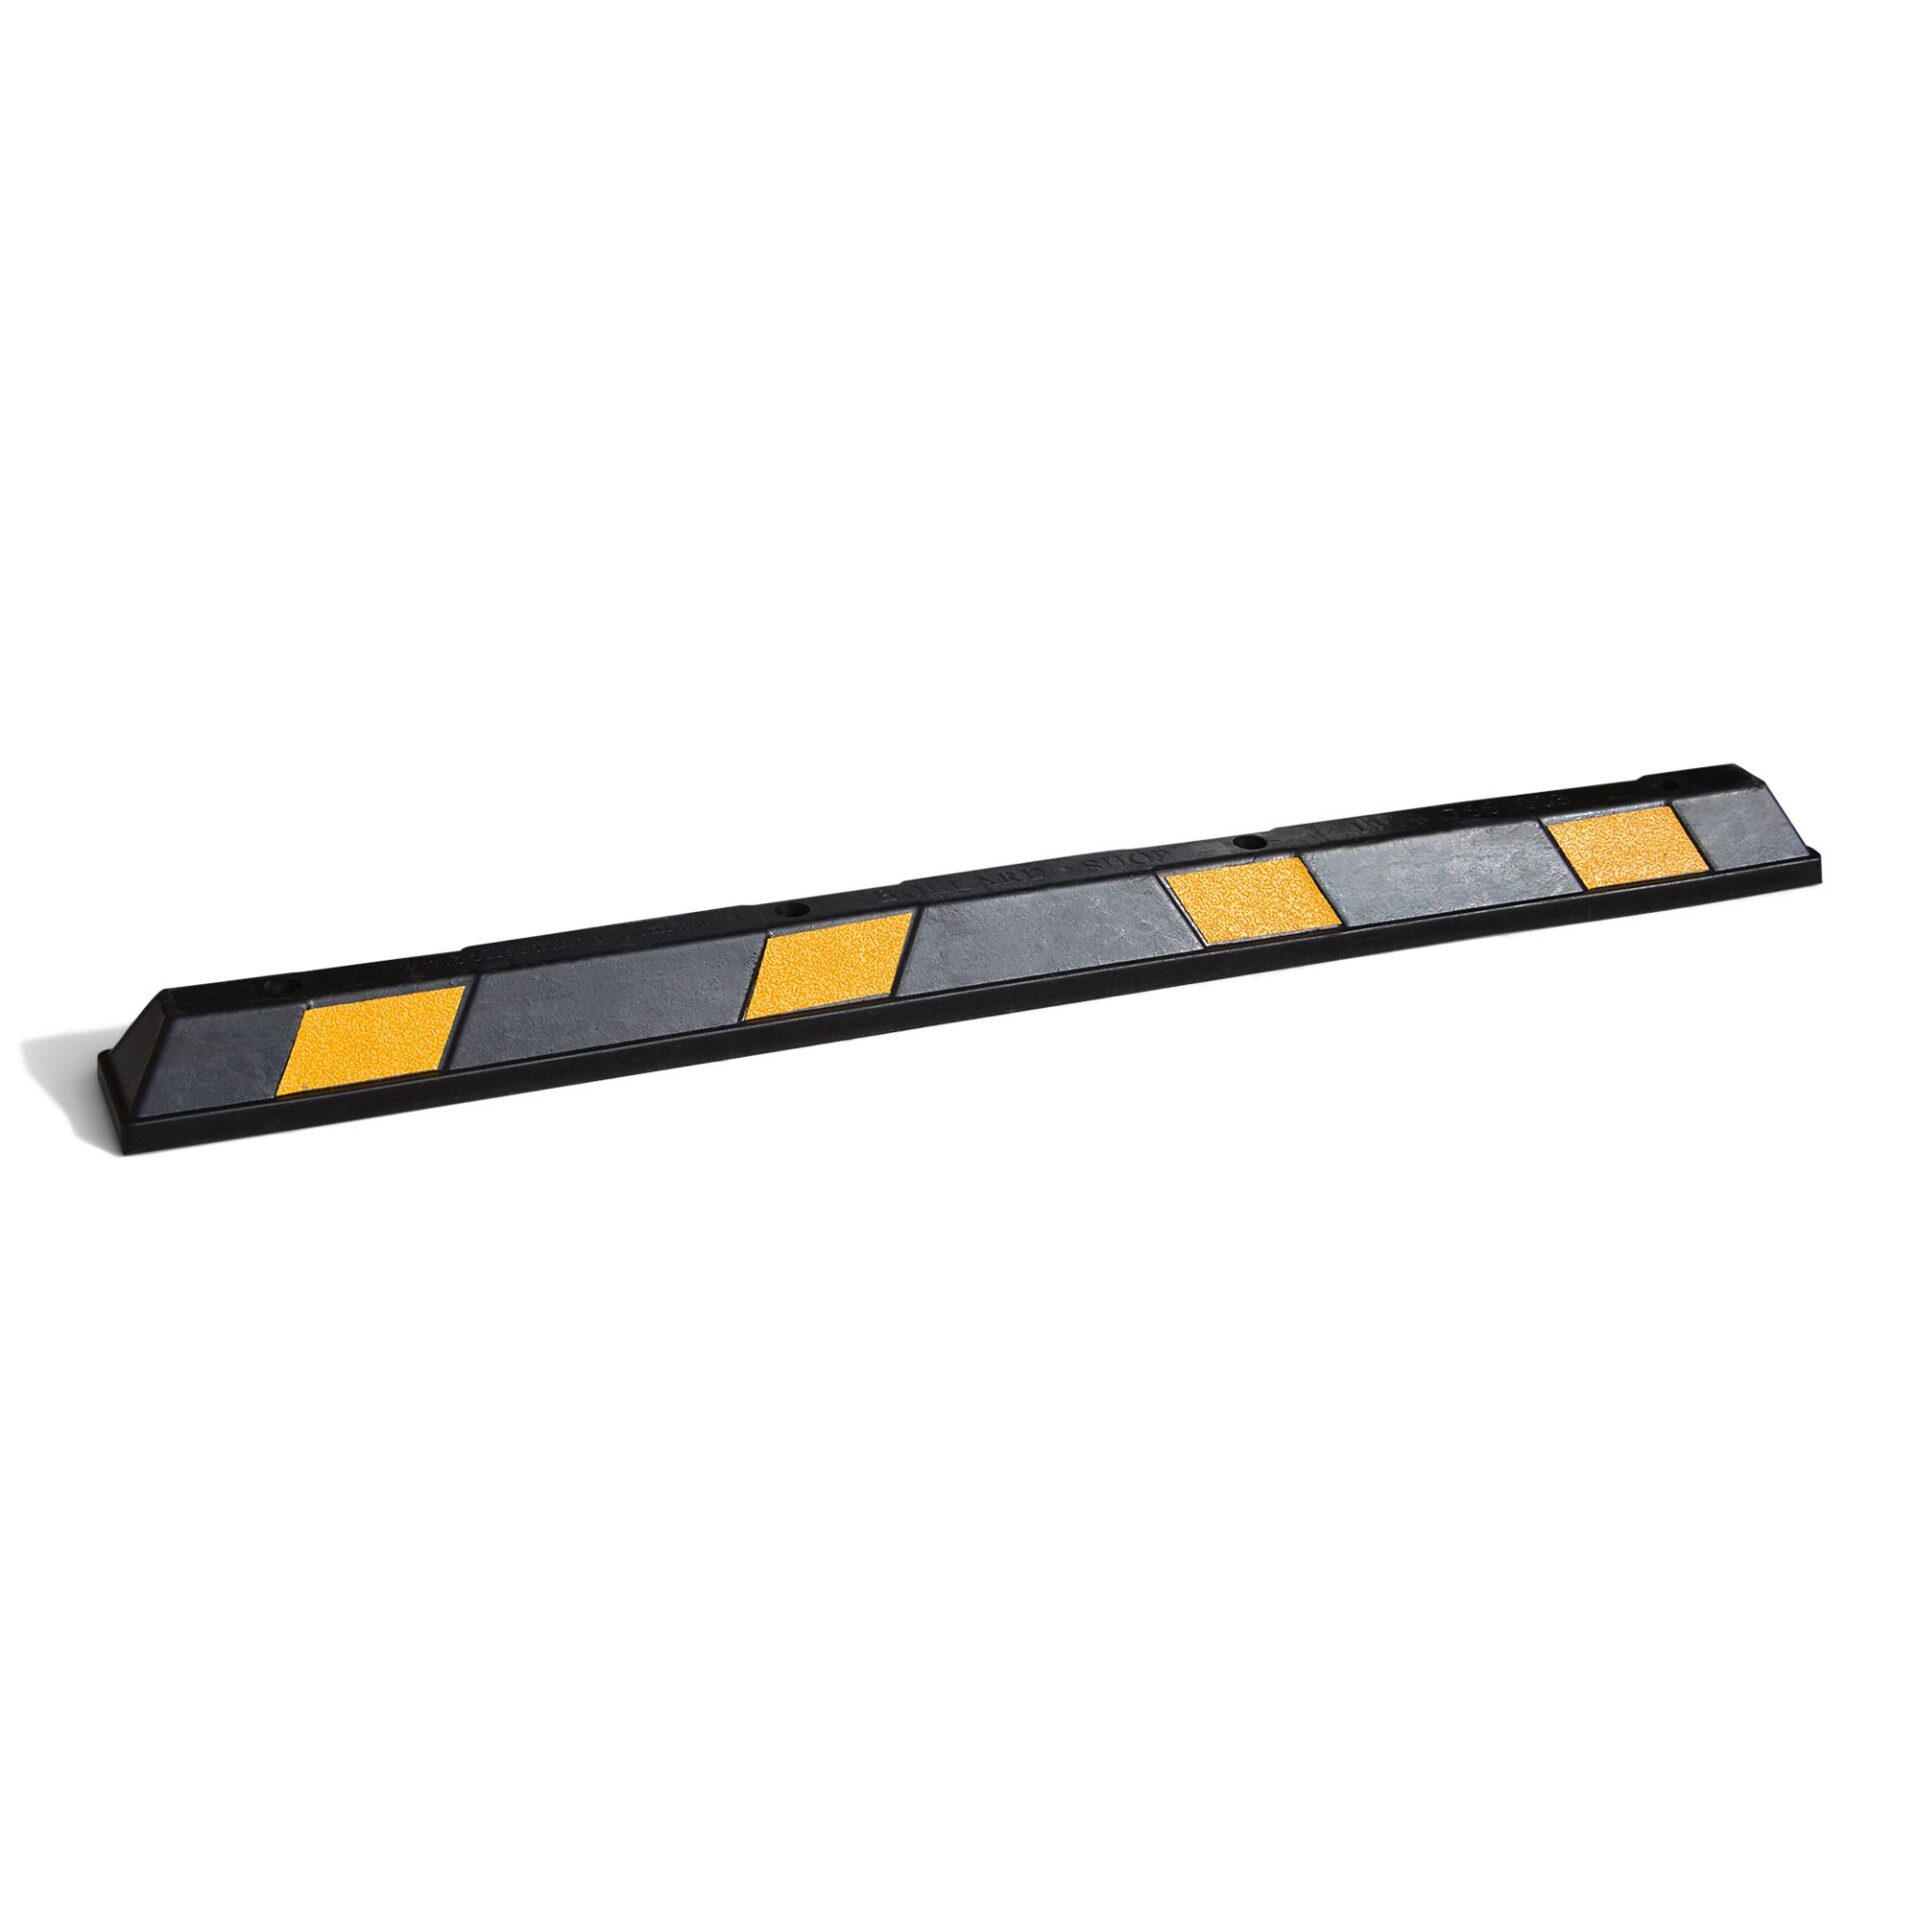 SNS SAFETY LTD RWS-225 Rubber Parking Wheel Stop for Commercial and Domestic Car Parks and Private Garages Black and Yellow Pack of 1 60x12x10 cm 